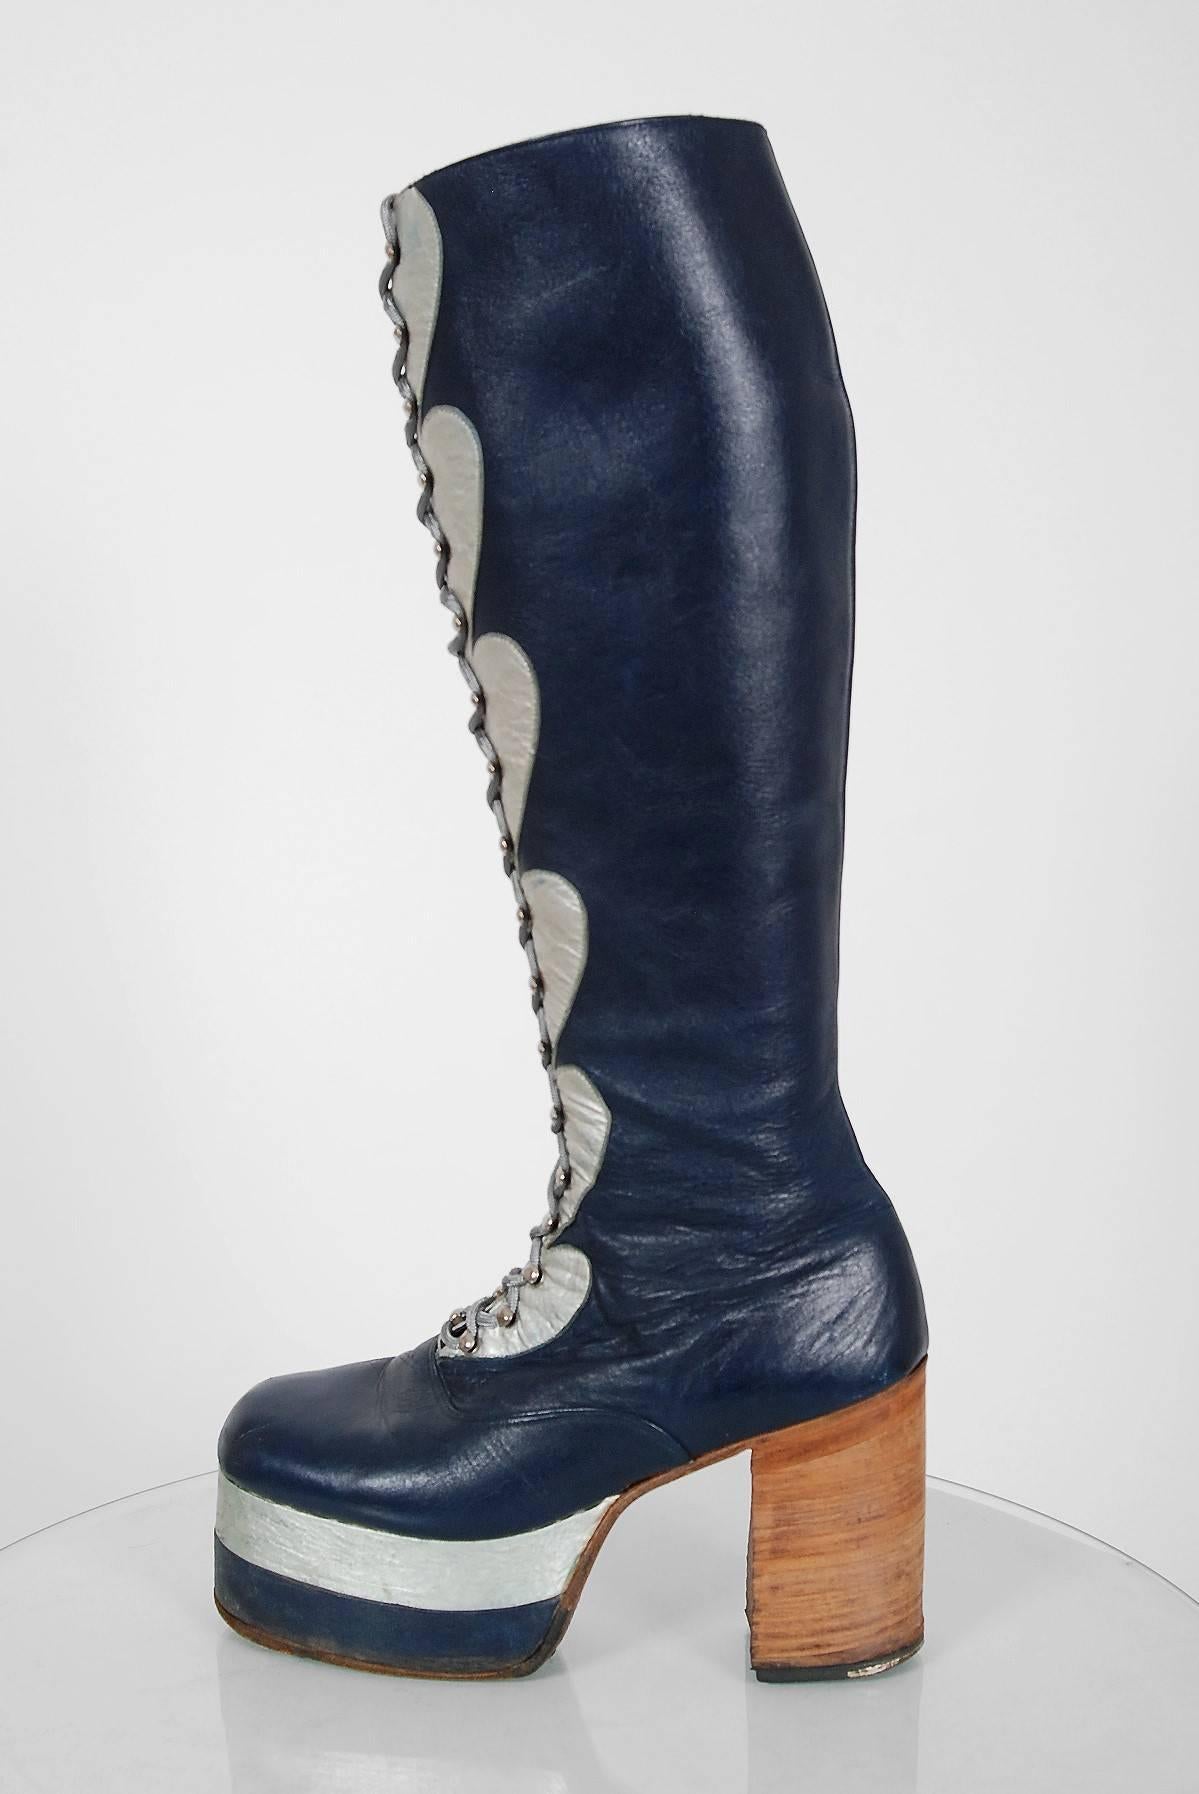 Amazing 1970's British custom-made leather boots in the most incredible cobalt blue and silver color combination. These boots have stacked wood heels with a two-tone leather covered high platform. I love the detailed novelty heart applique work and